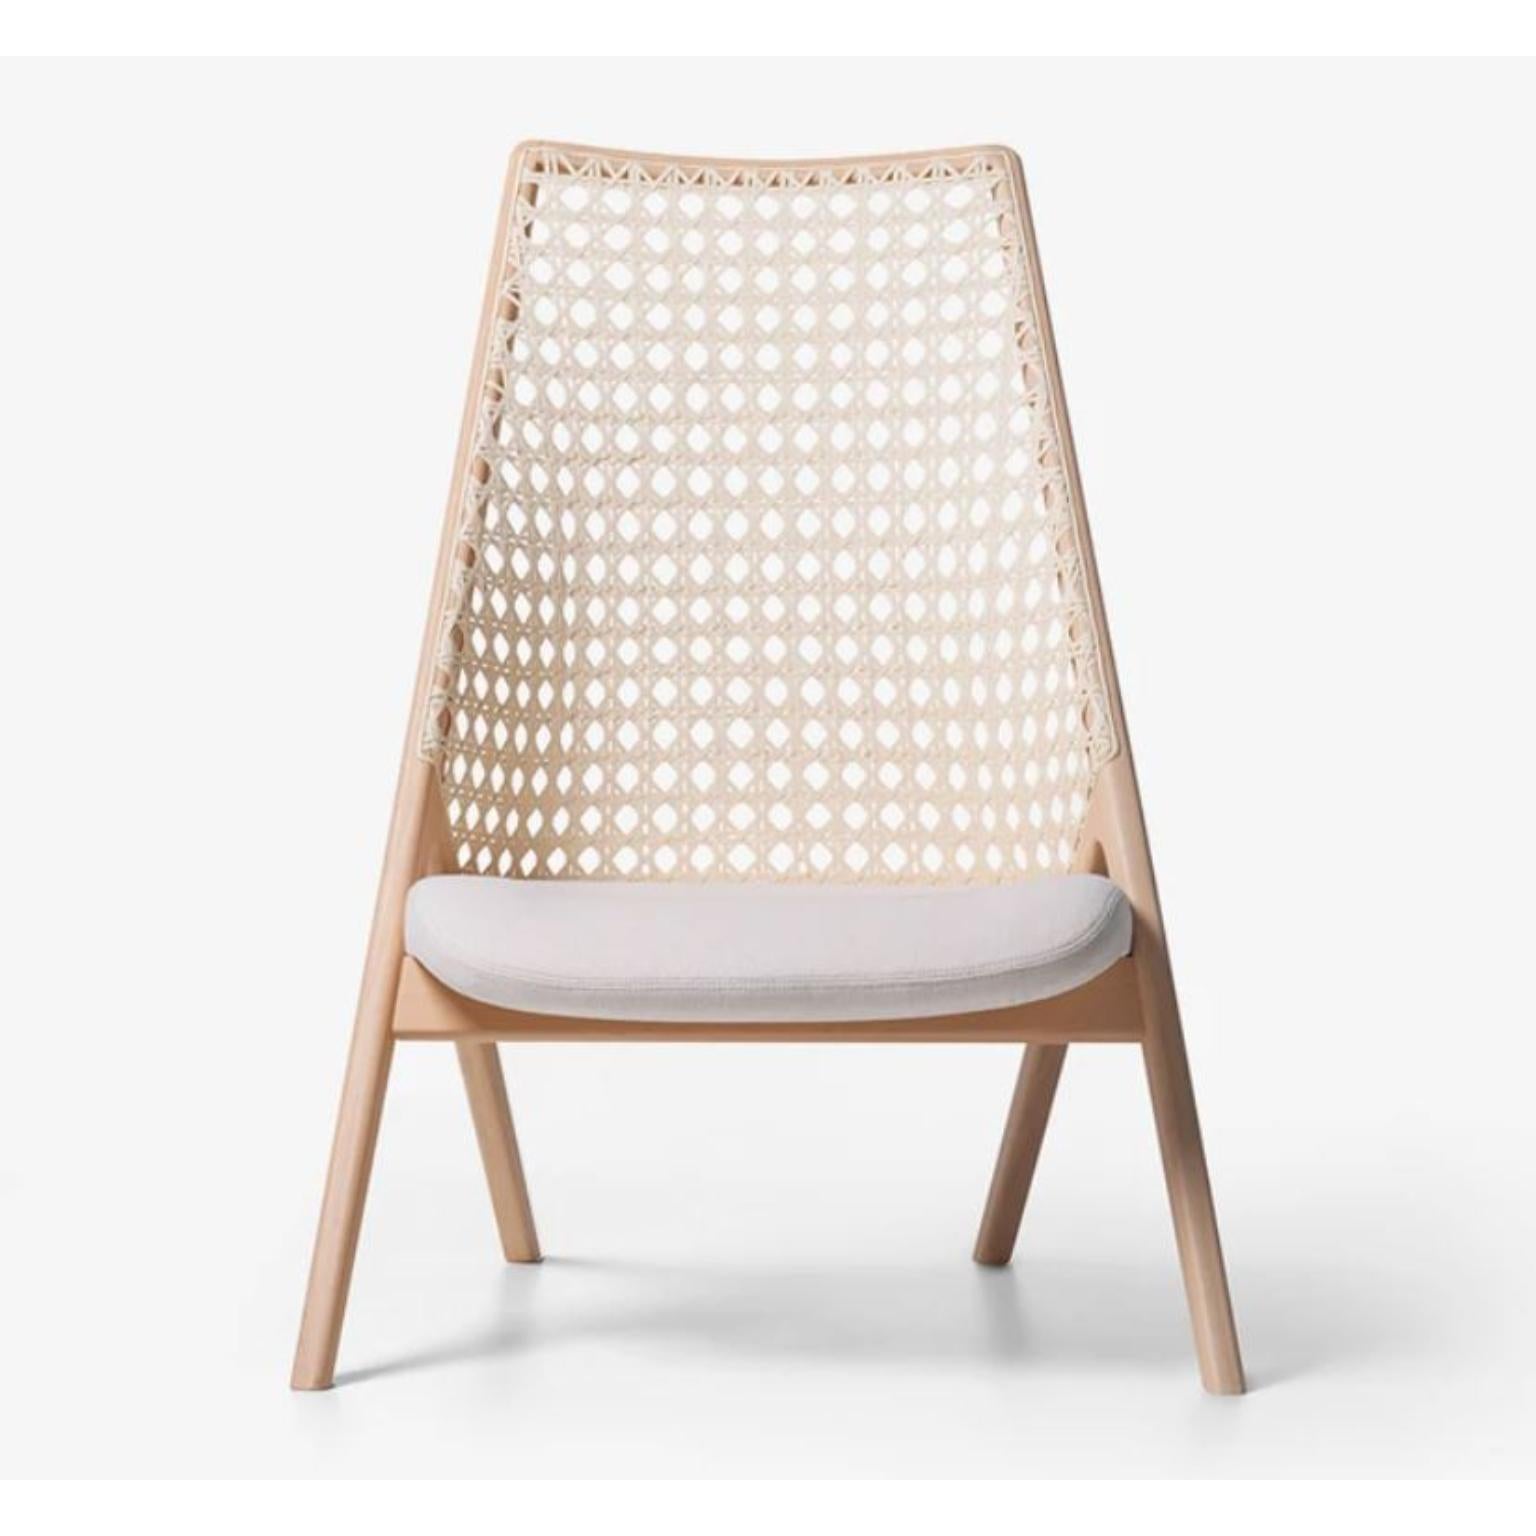 Bleached Tauari Tela Lounge Chair by Wentz
Dimensions: D 75 x W 75 x H 101 cm
Materials: Tauari Wood, Cotton Weave, Plywood, Upholstery.
Weight: 7,9kg / 17, 5 lbs

The Tela armchair is a meeting between contemporary design and traditional Brazilian